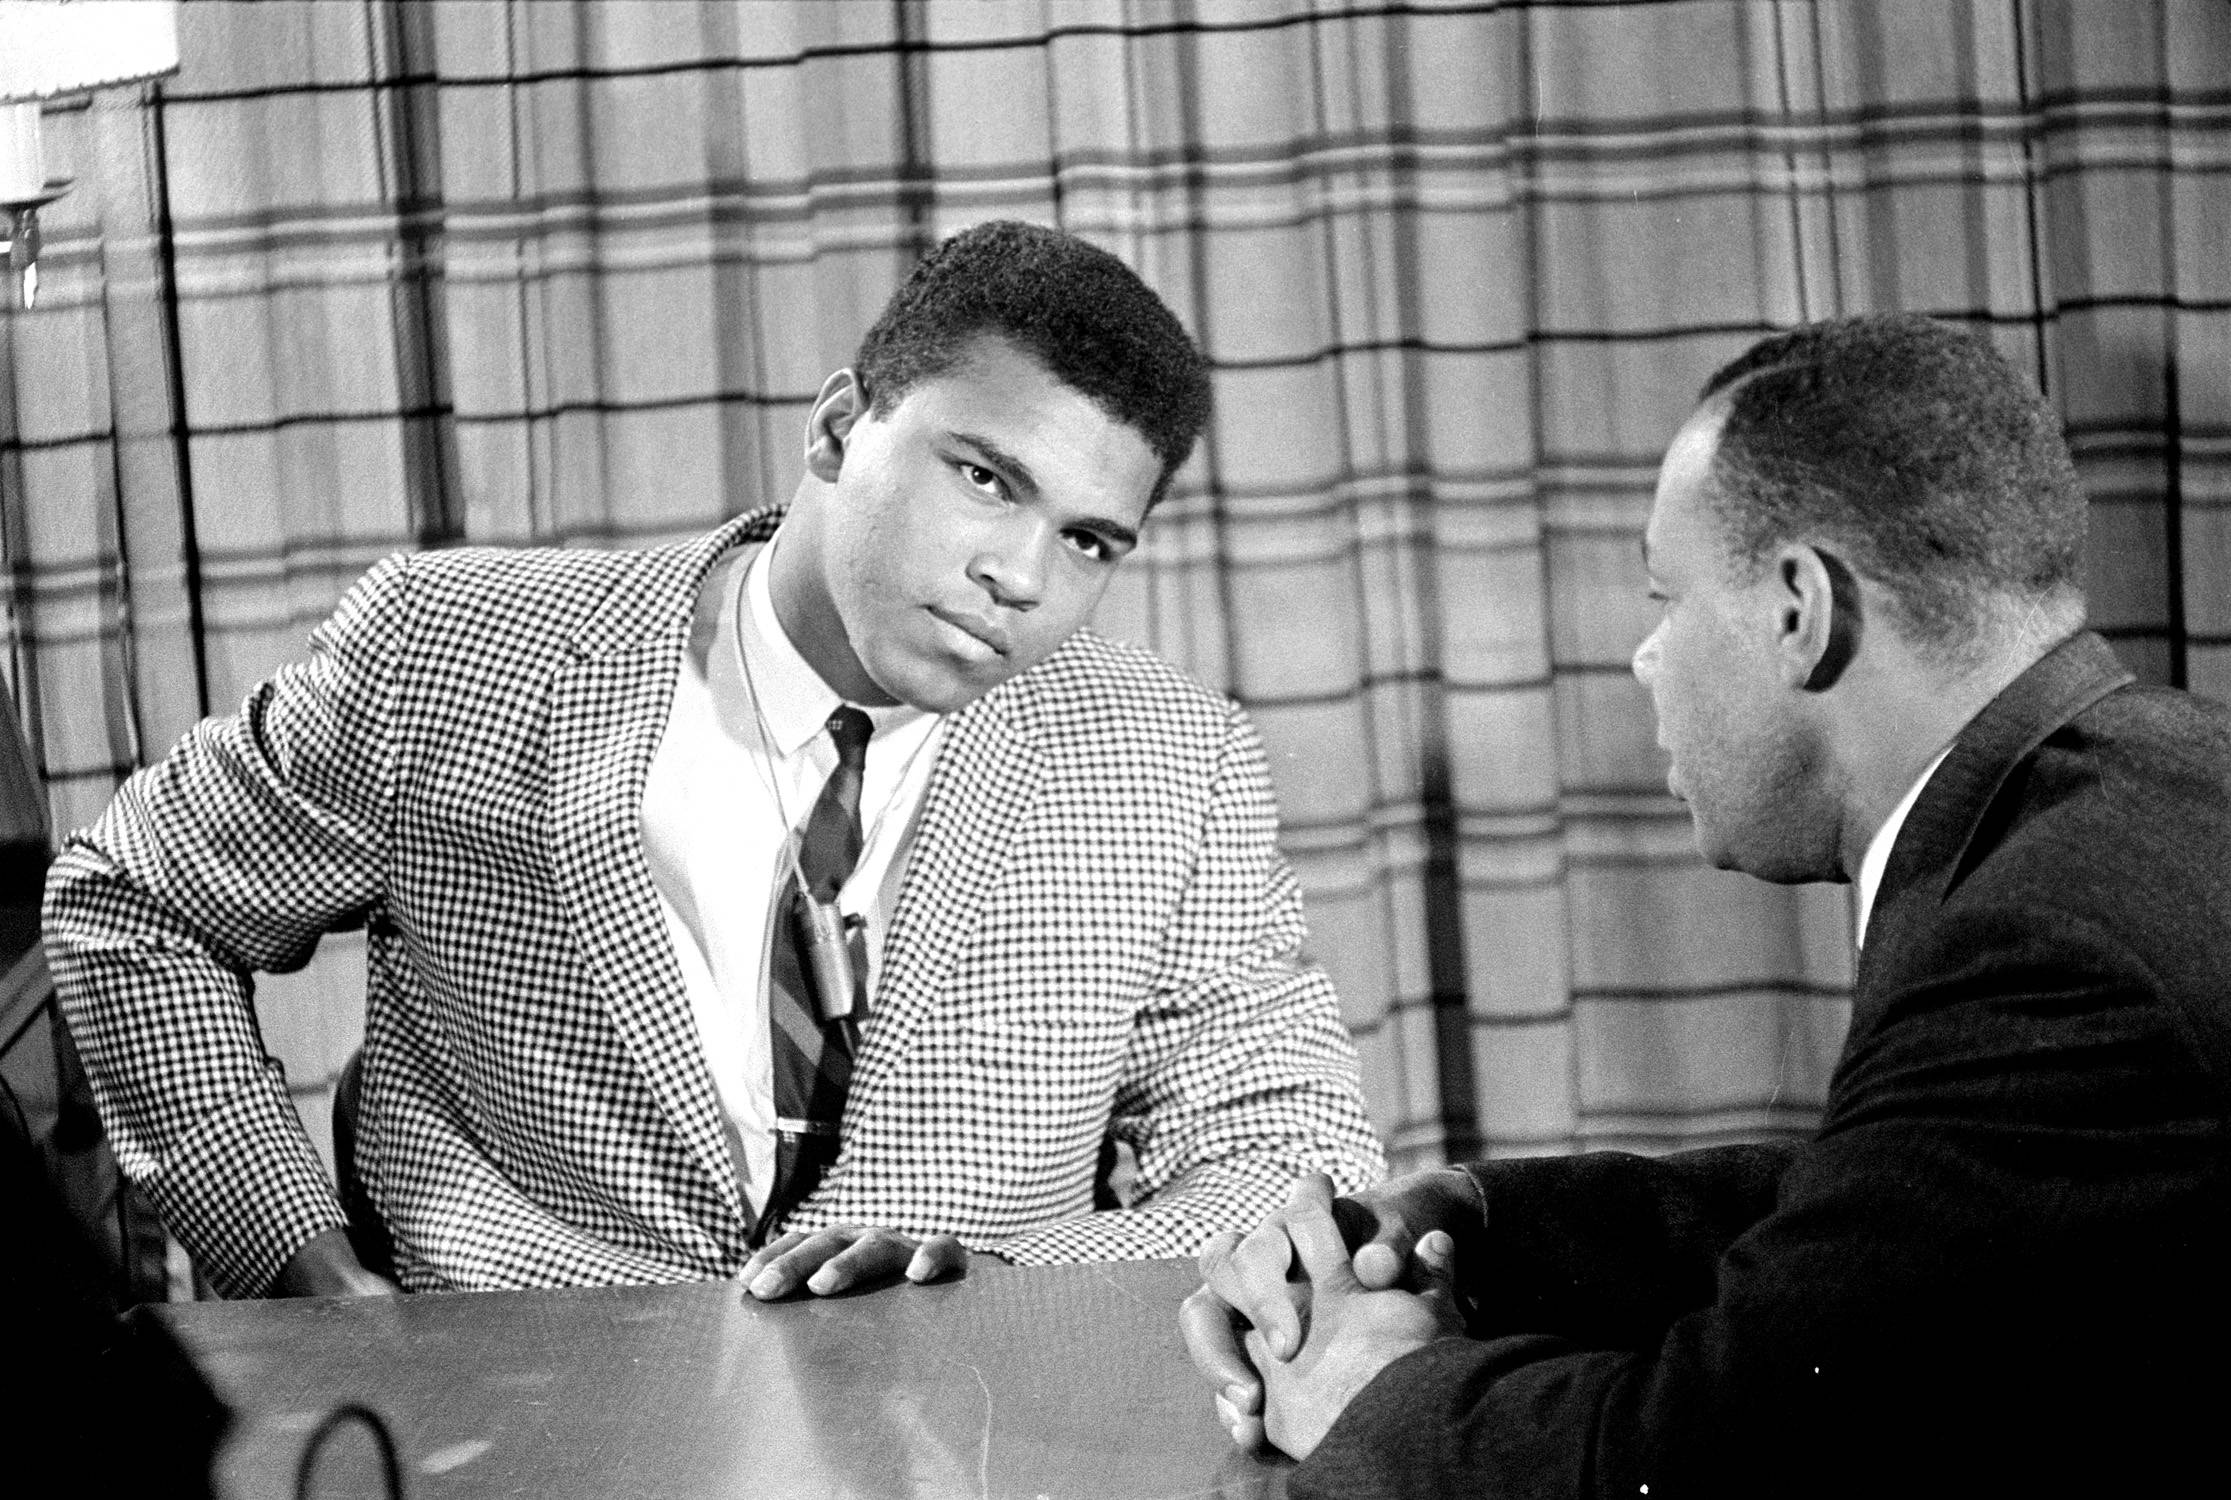 Cassius Clay Becomes Muhammad Ali - In 1964, he changed his name from Cassius Clay to Muhammad X after joining Black Muslim group the Nation of Islam, but eventually settled on Muhammad Ali. Ali said his religious beliefs prevented him from fighting in the Vietnam War, and he refused to answer his call to duty after being drafted in 1966. The following year, the boxer was entangled in a lengthy court battle with the U.S. Department of Justice and was found guilty for refusing his military service. Ali’s name was eventually cleared, but the boxing association stripped the fighter of his title and banned him from the ring for 3 and a half years.&nbsp;&nbsp;(Photo: CBS /Landov)